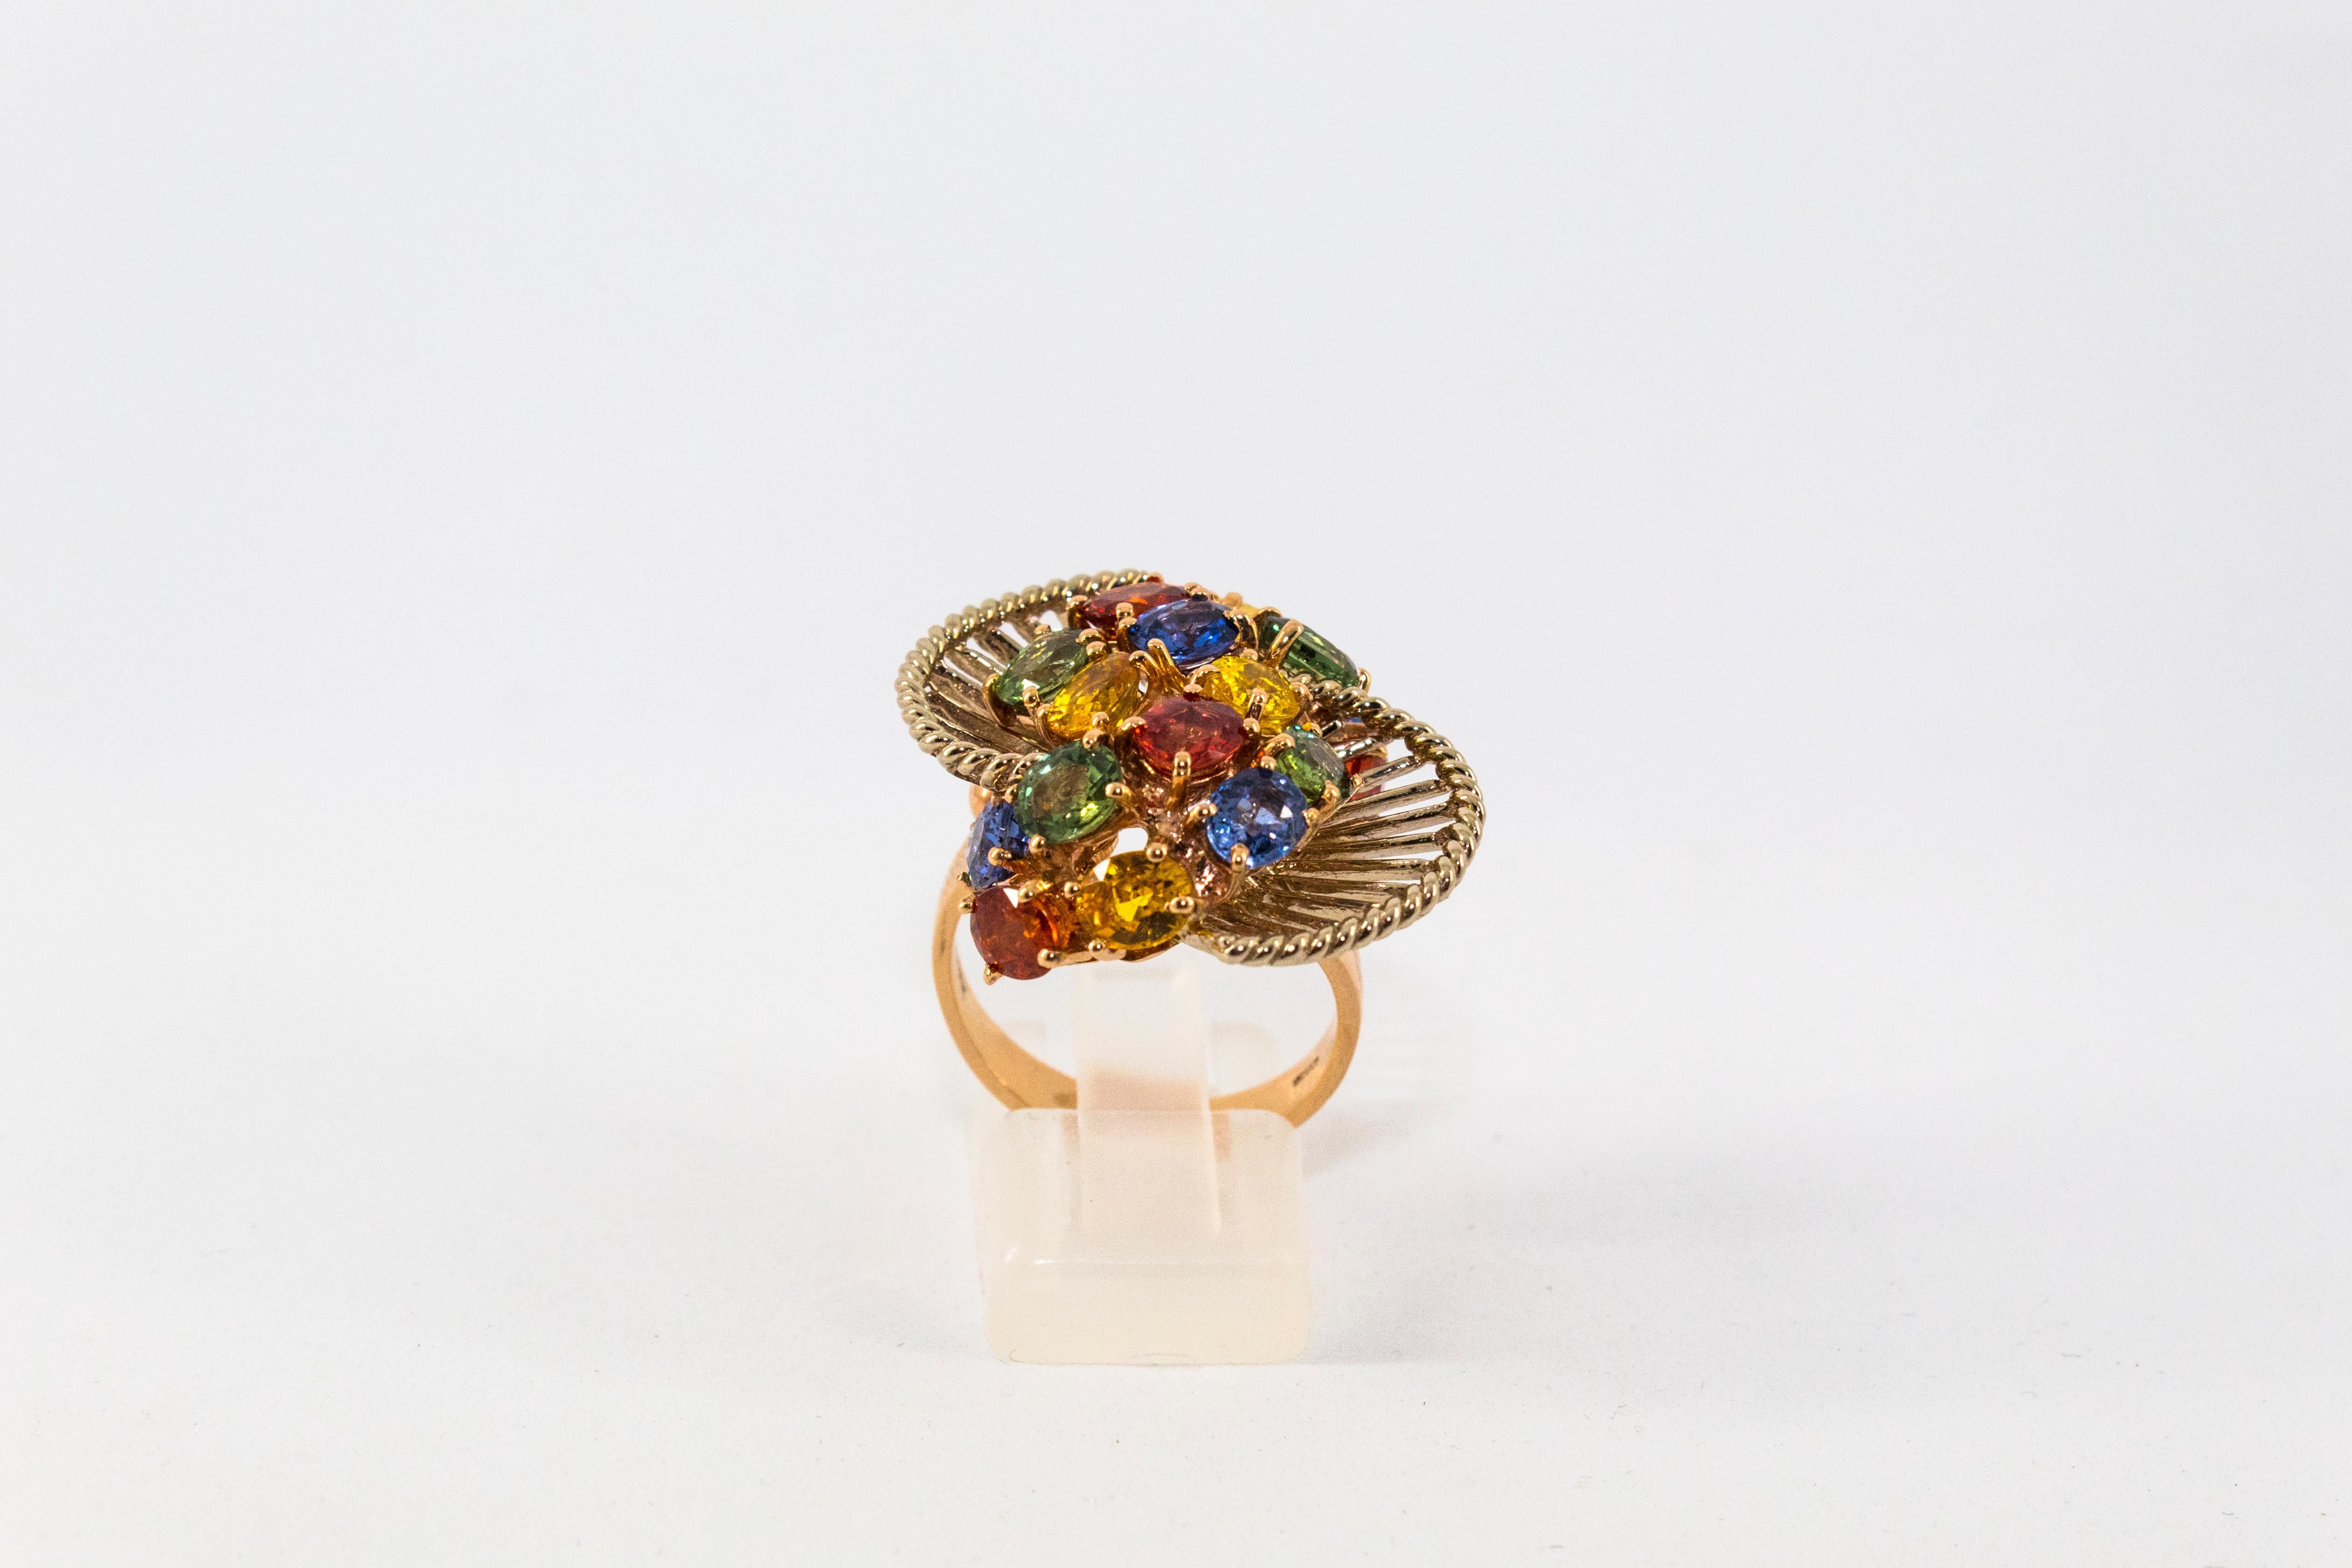 This Ring is made of 14K Yellow Gold.
This Ring has 7.00 Carats of Green, Yellow and Blue Sapphires.
This Ring is inspired by Art Nouveau.
Size ITA: 16 USA: 7.5
We're a workshop so every piece is handmade, customizable and resizable.